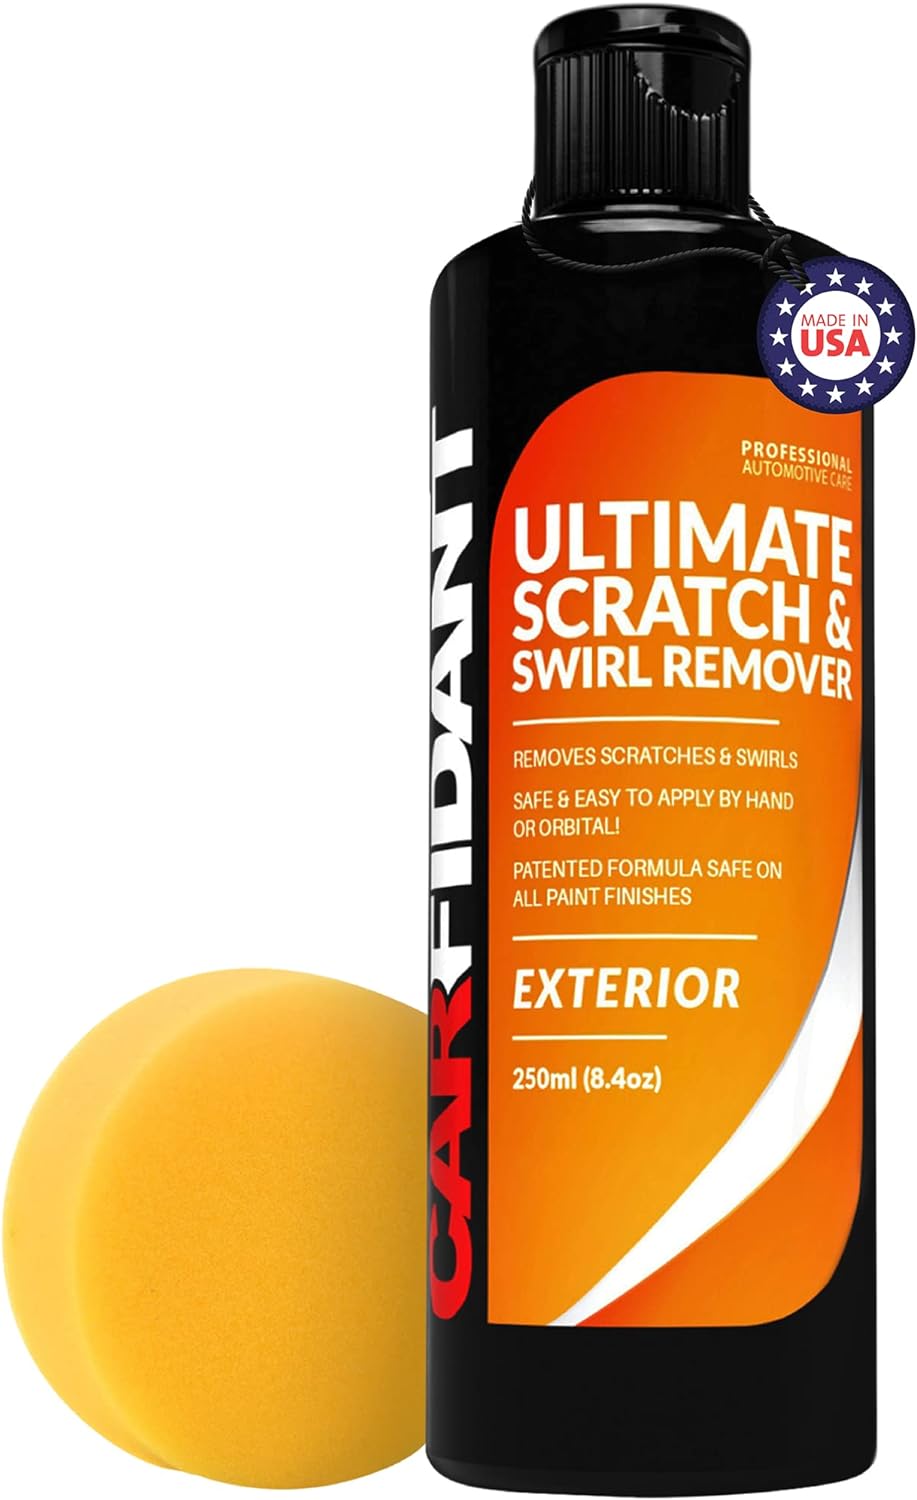 Carfidant Scratch and Swirl Remover - Car Scratch Remover for Deep Scratches with Buffer Pad, Scratch Remover for Vehicles Repair Paint Any Color - Rubbing Compound for Cars